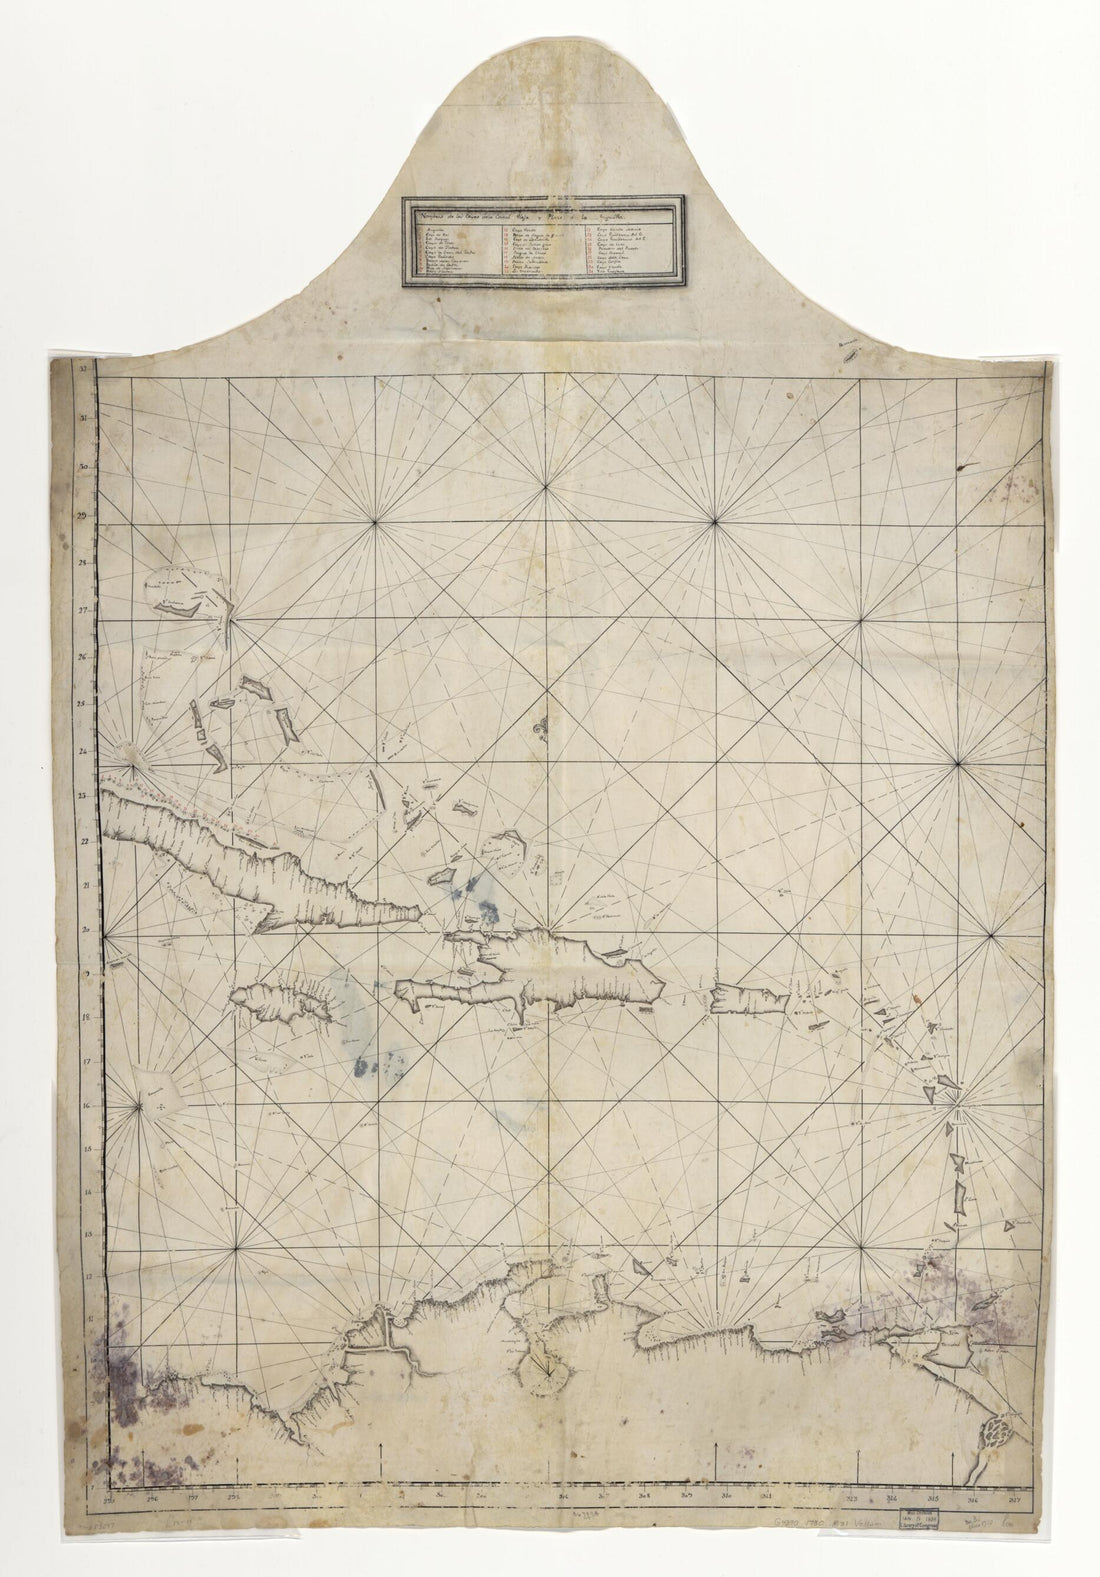 This old map of Map Showing Caribbean Area Including West Indies and Gulf of Mexico from 1730 was created by  in 1730